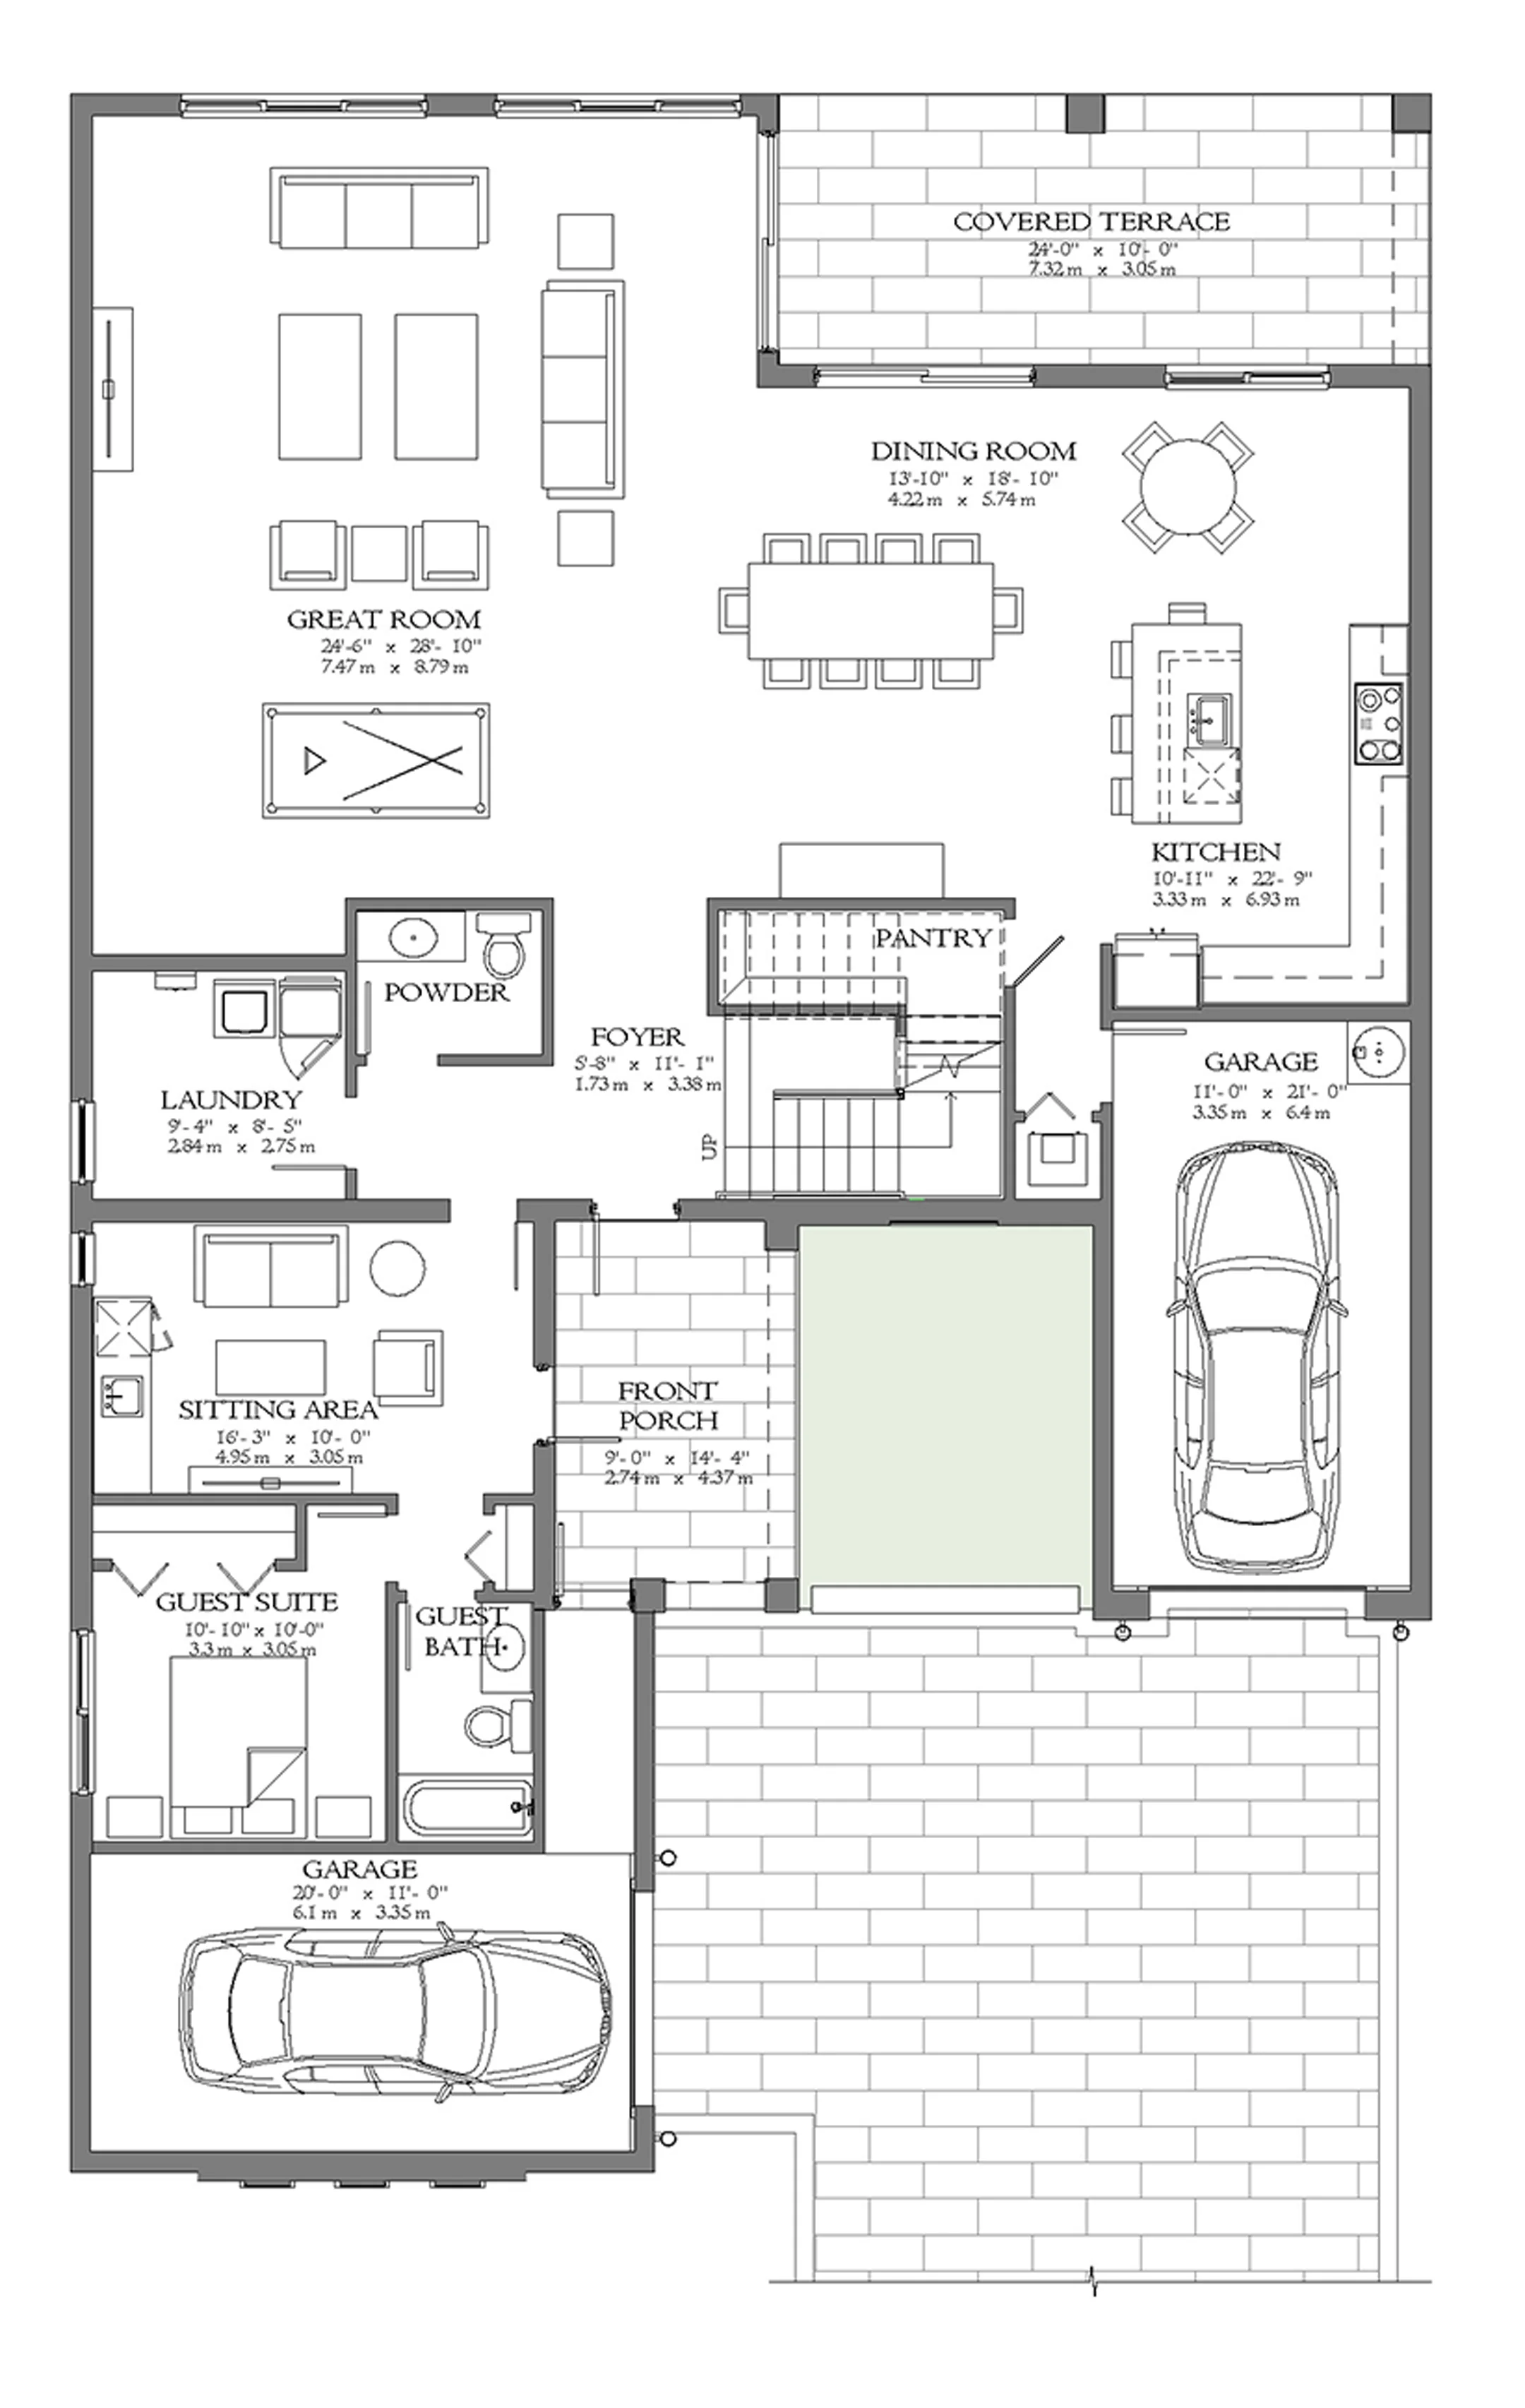 2D Floor Plan Archives - Page 2 of 6 - DK Home DesignX